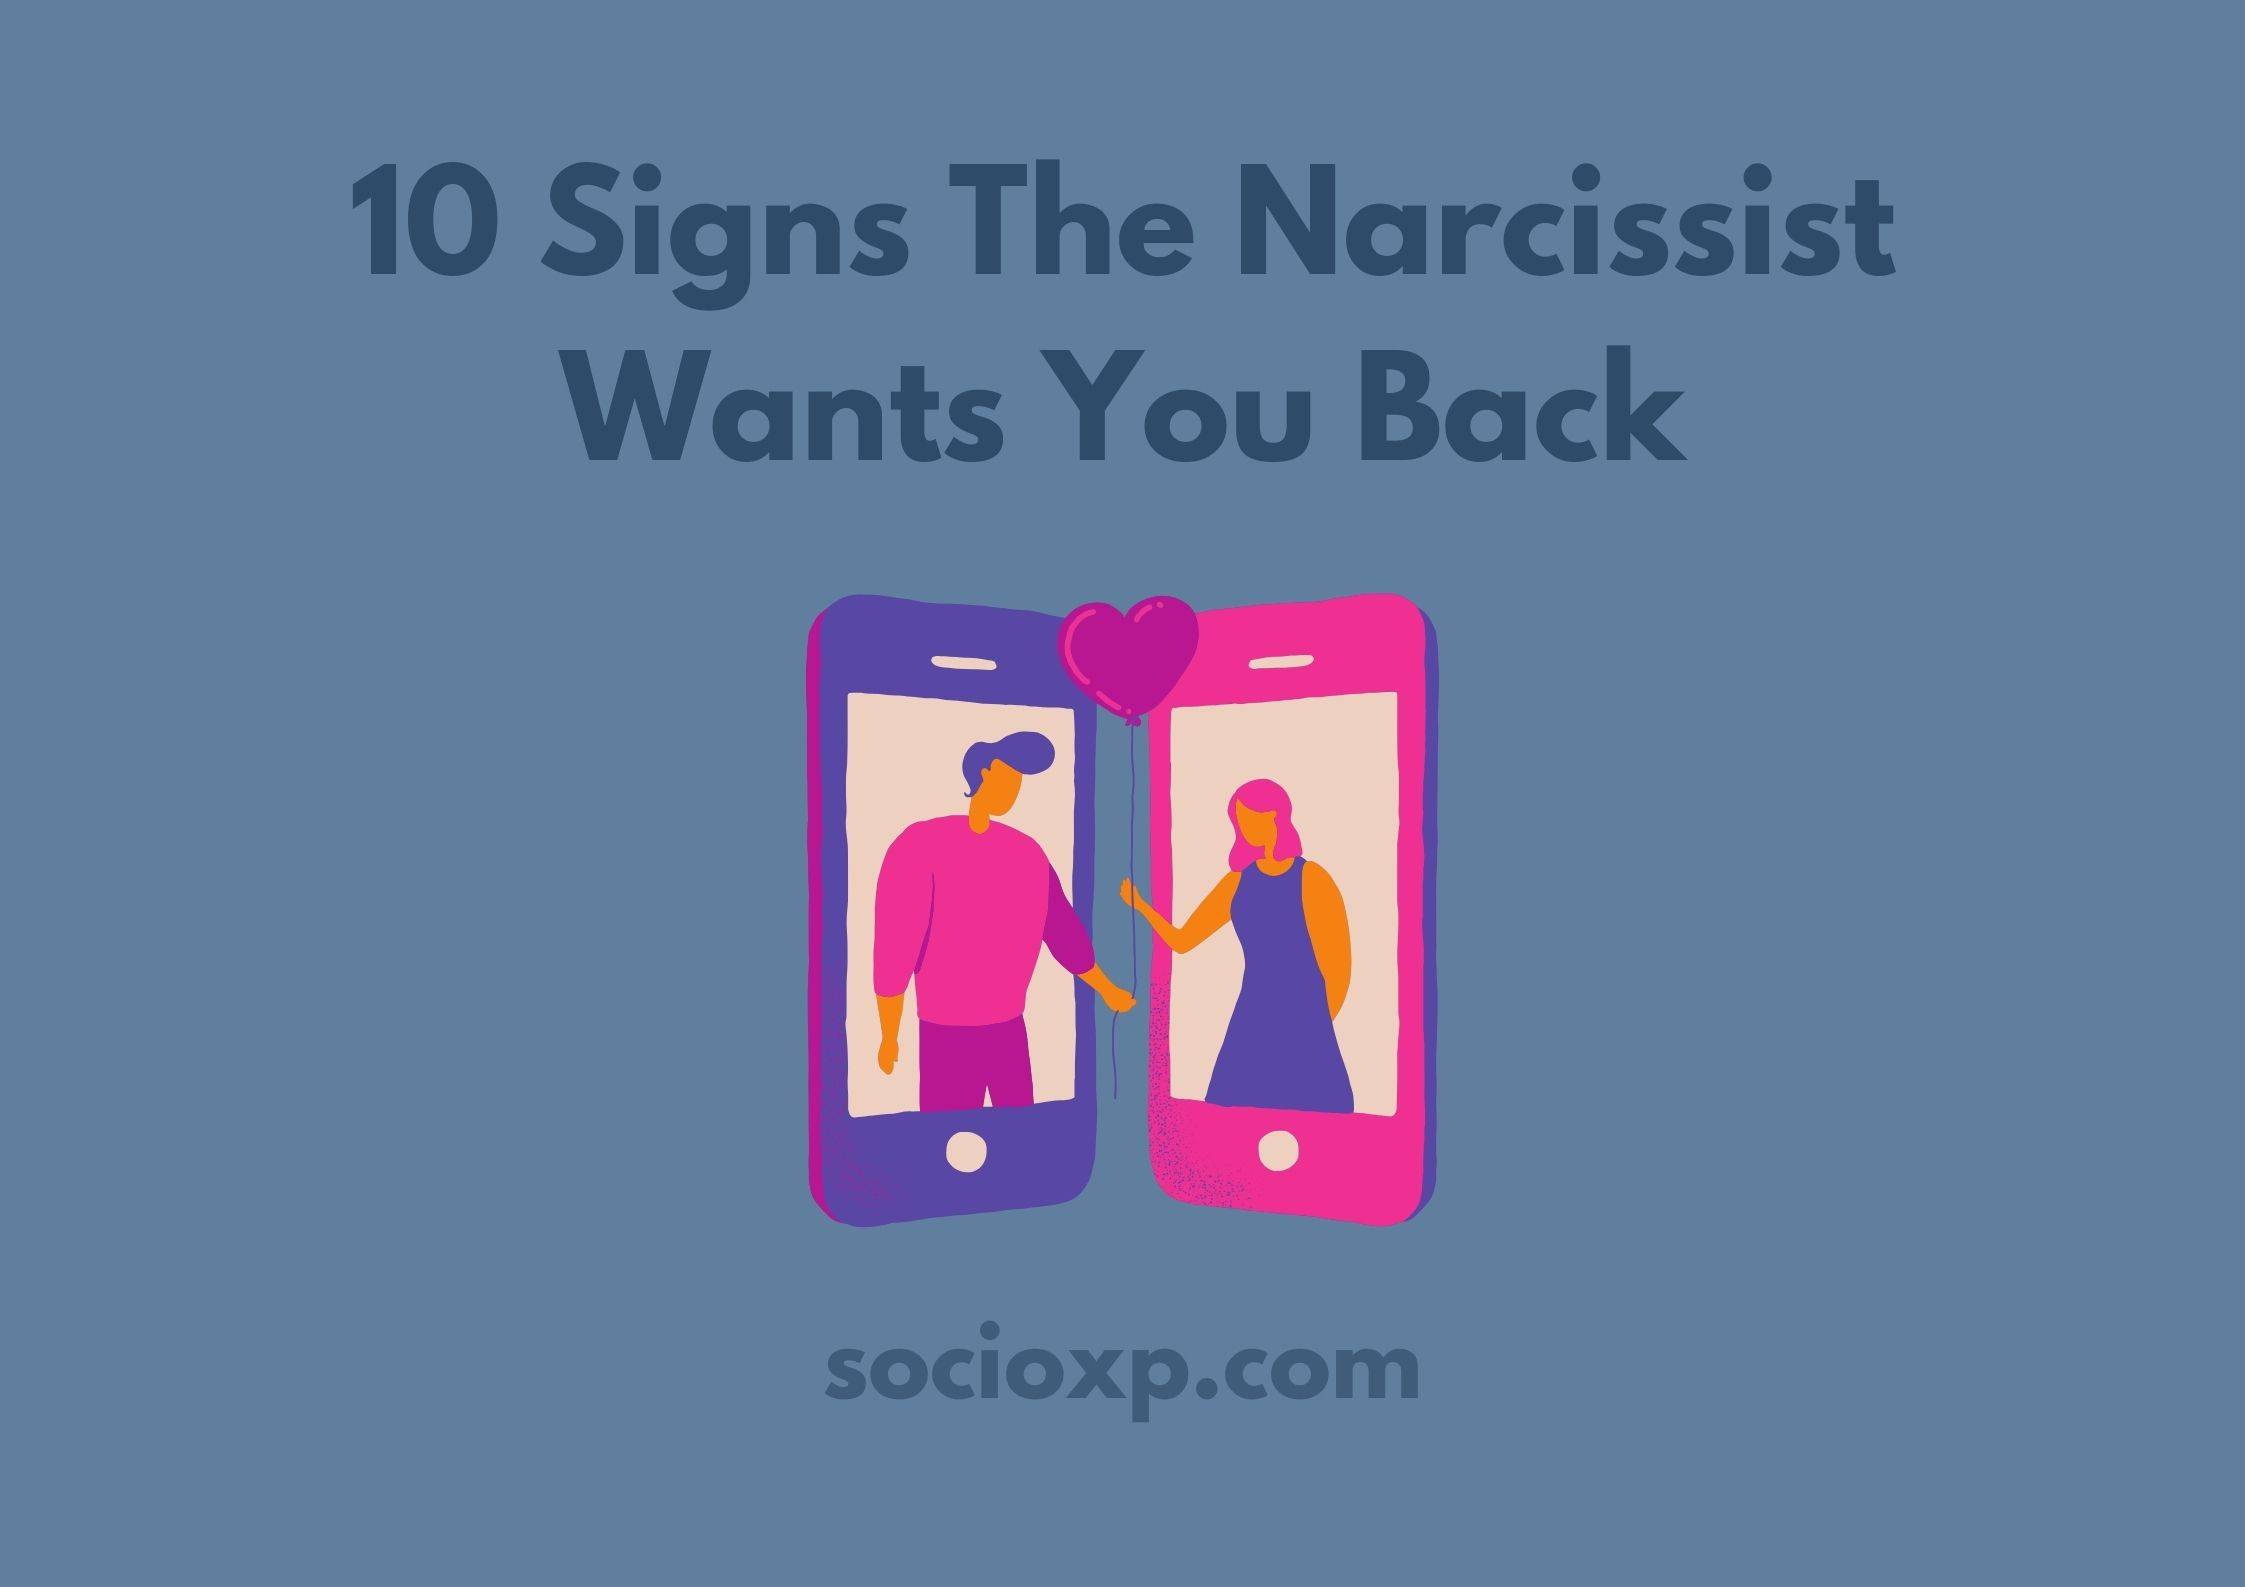 10 Signs The Narcissist Wants You Back